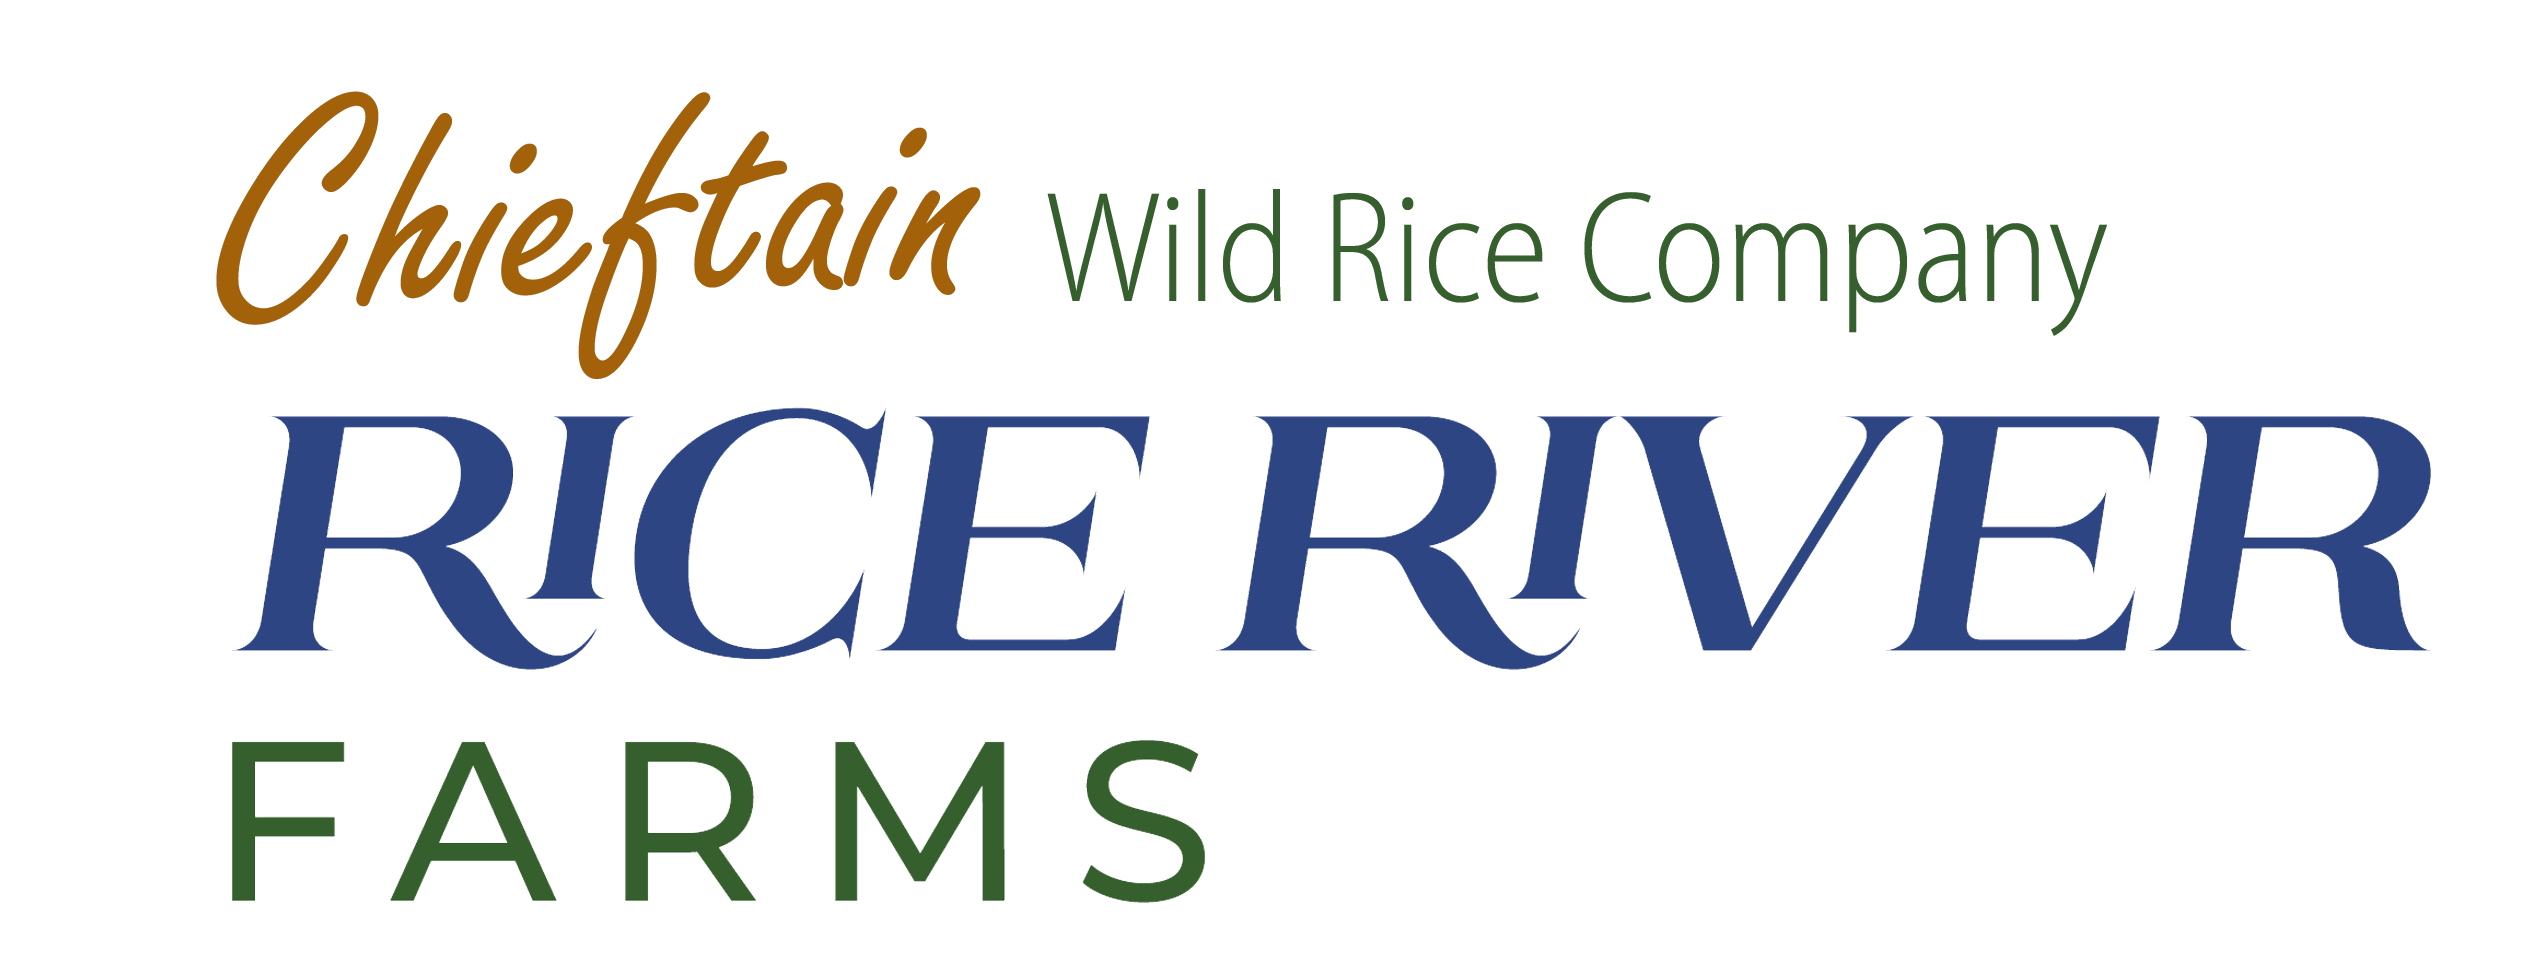 Return to Chieftain Wild Rice Home Page